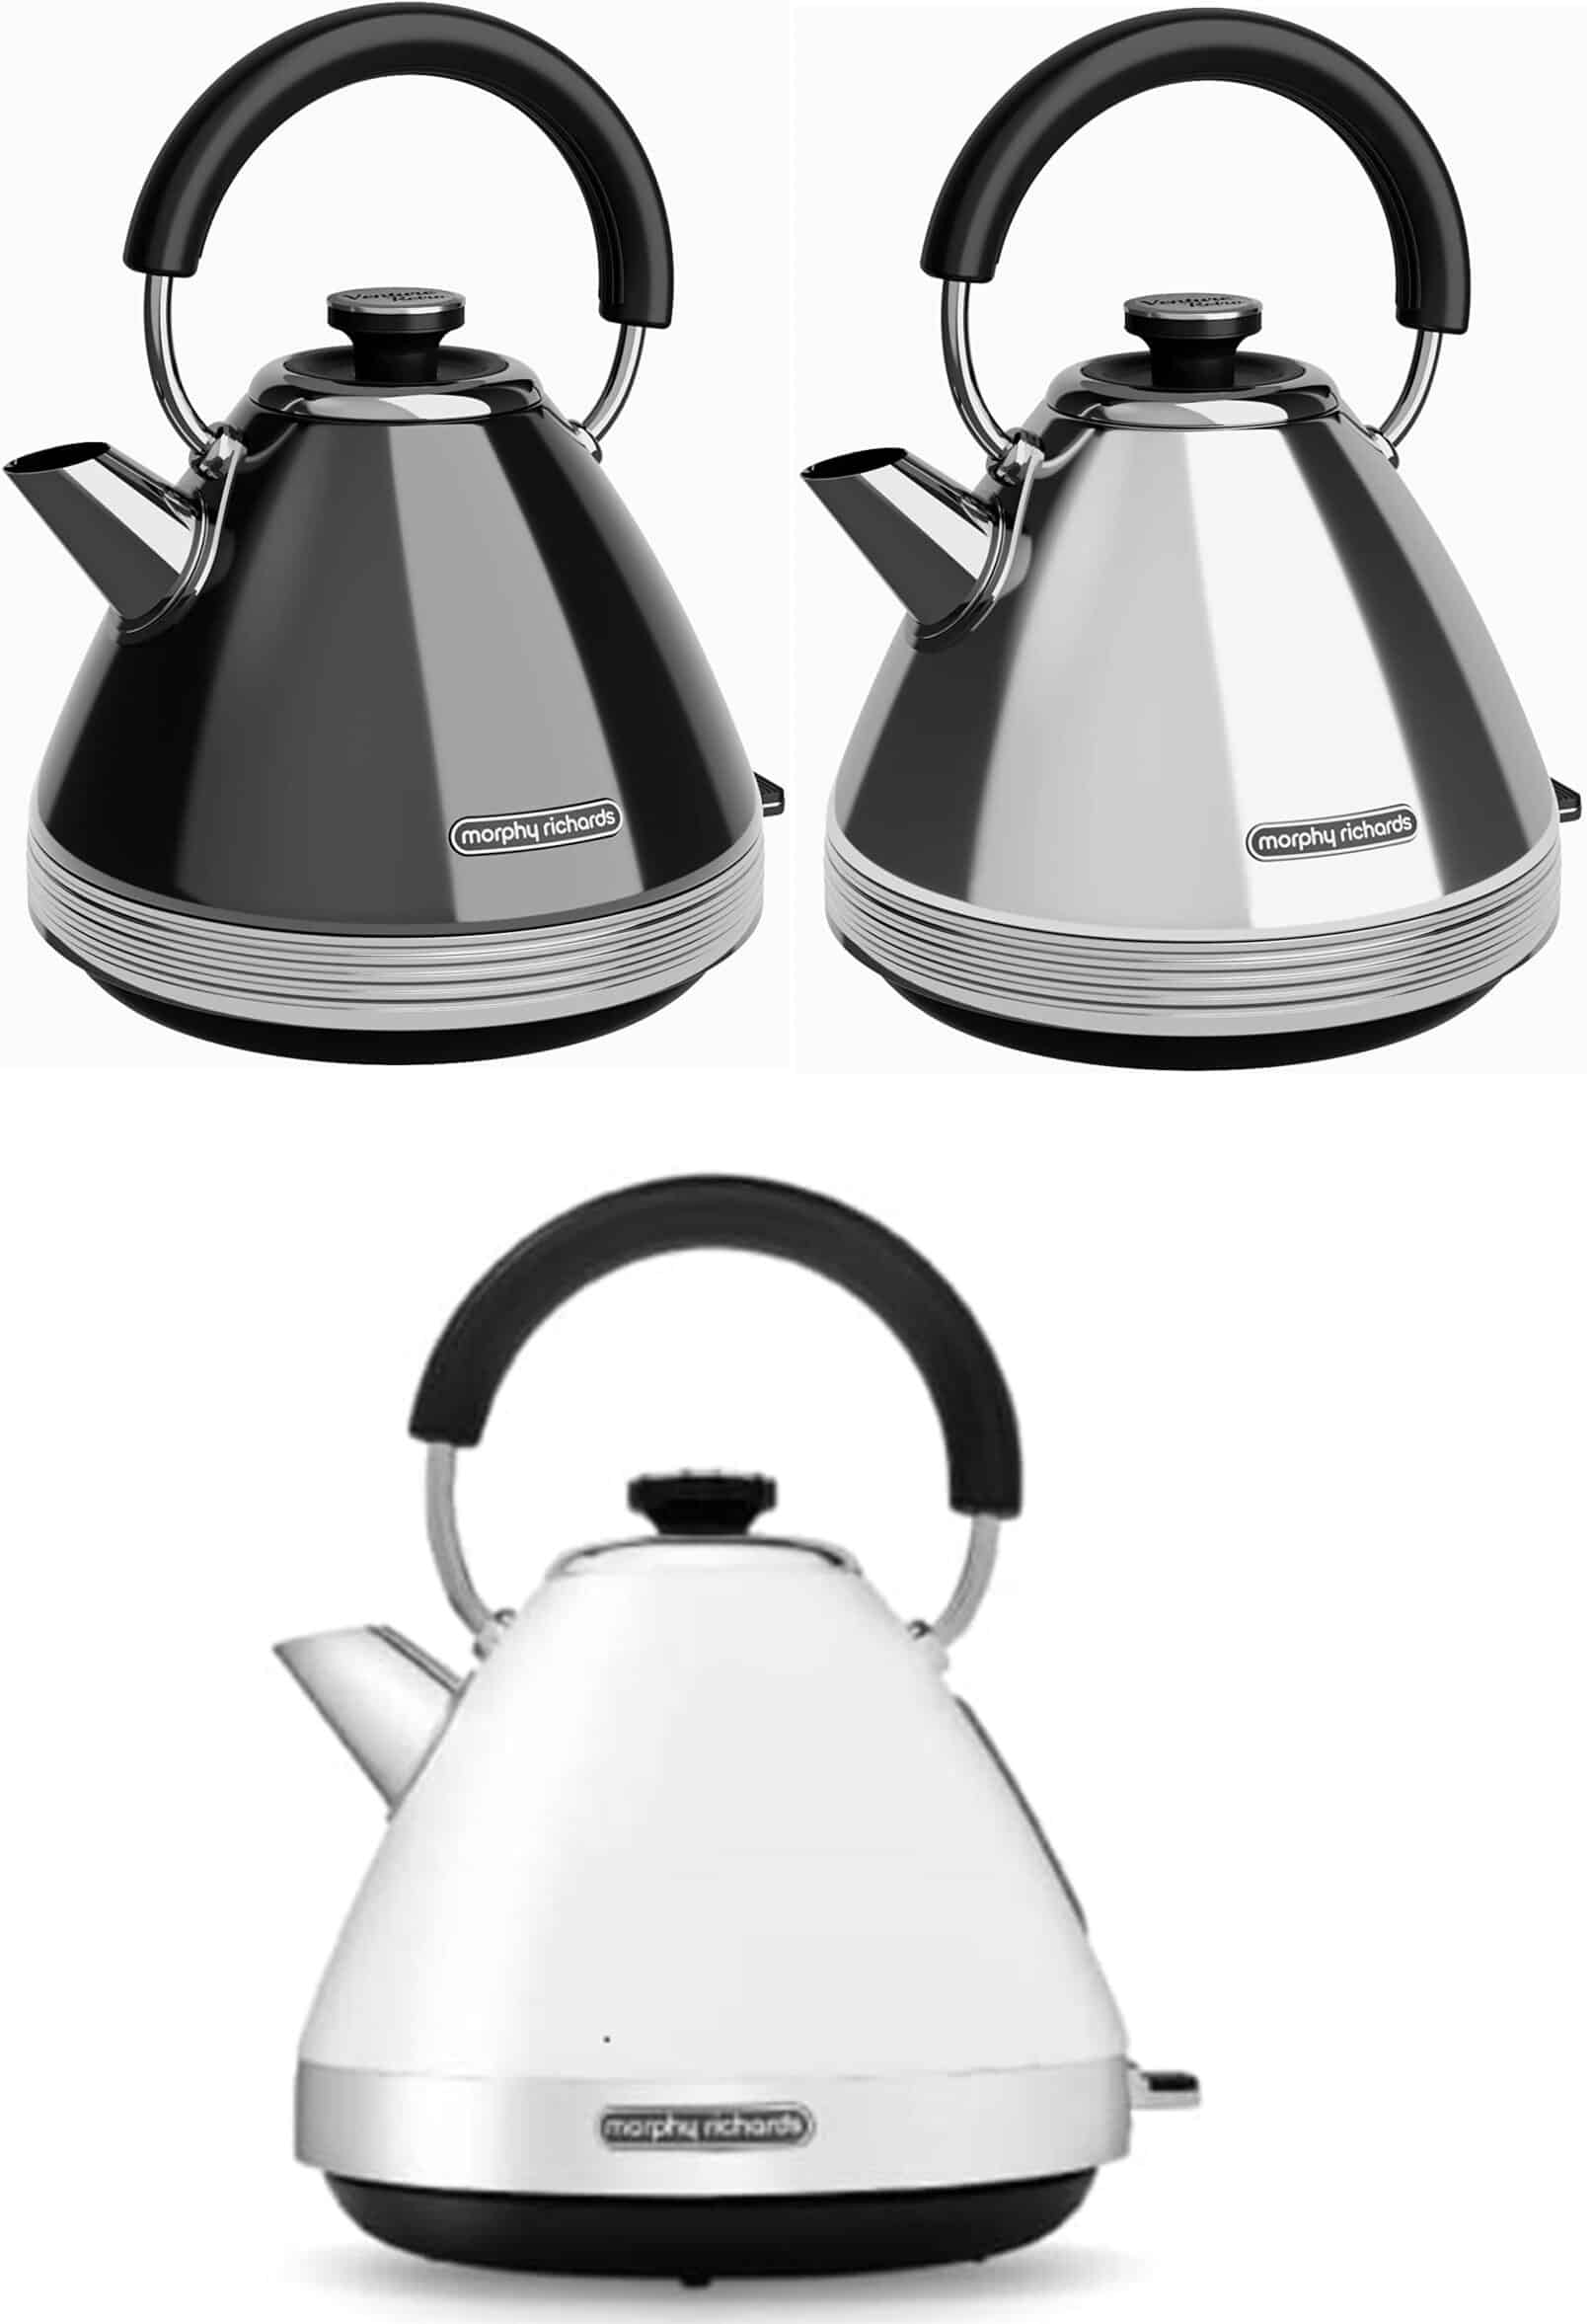 Morphy Richards Kettles & Toasters 4 Slice Pyramid 240134 -240133 -240132 - 240131 - 240130 - 100330 - 100331- 100134